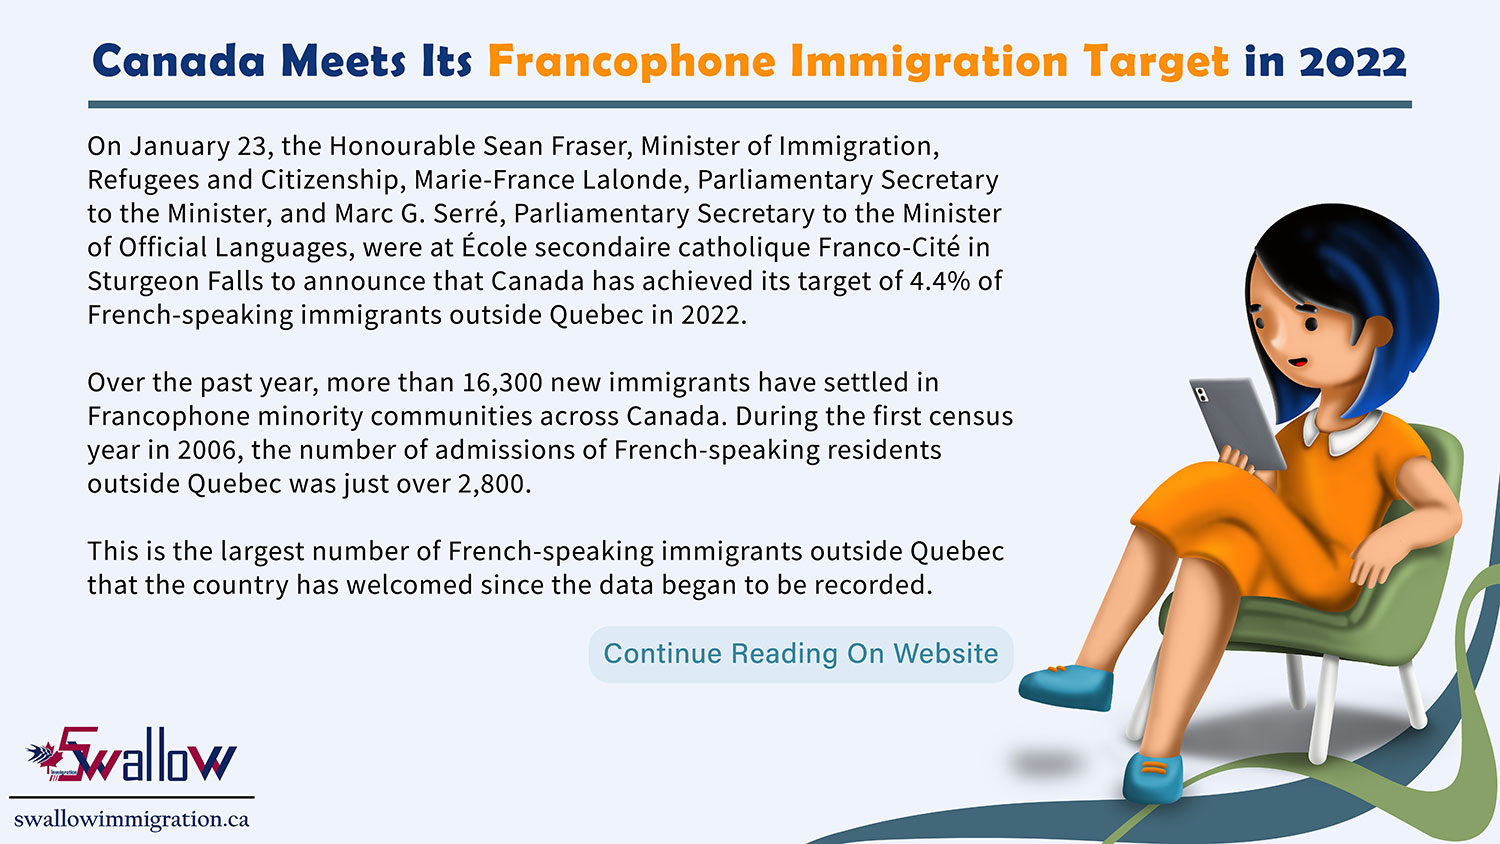 Canada Meets Its Francophone Immigration Target in 2022